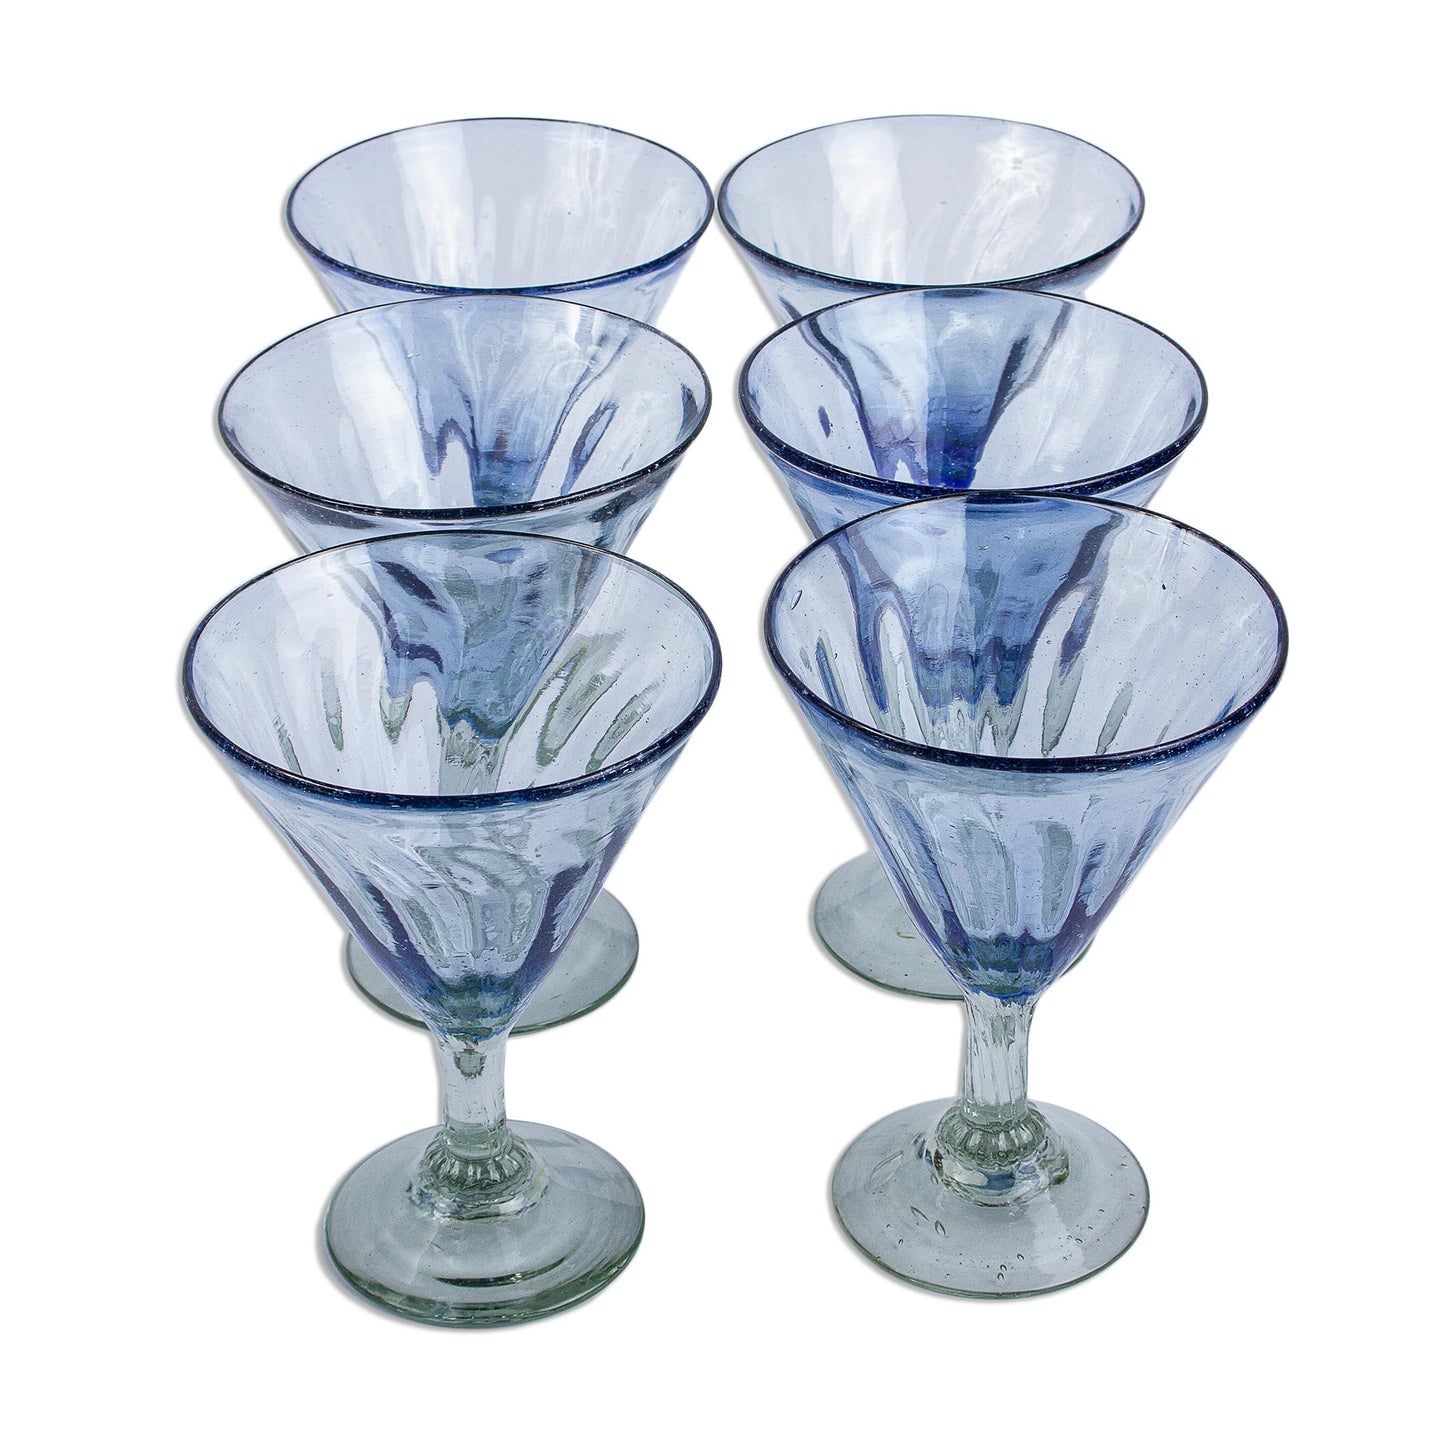 Fiesta Azul Hand Blown Blue Martini Glasses from Mexico (Set of 6)